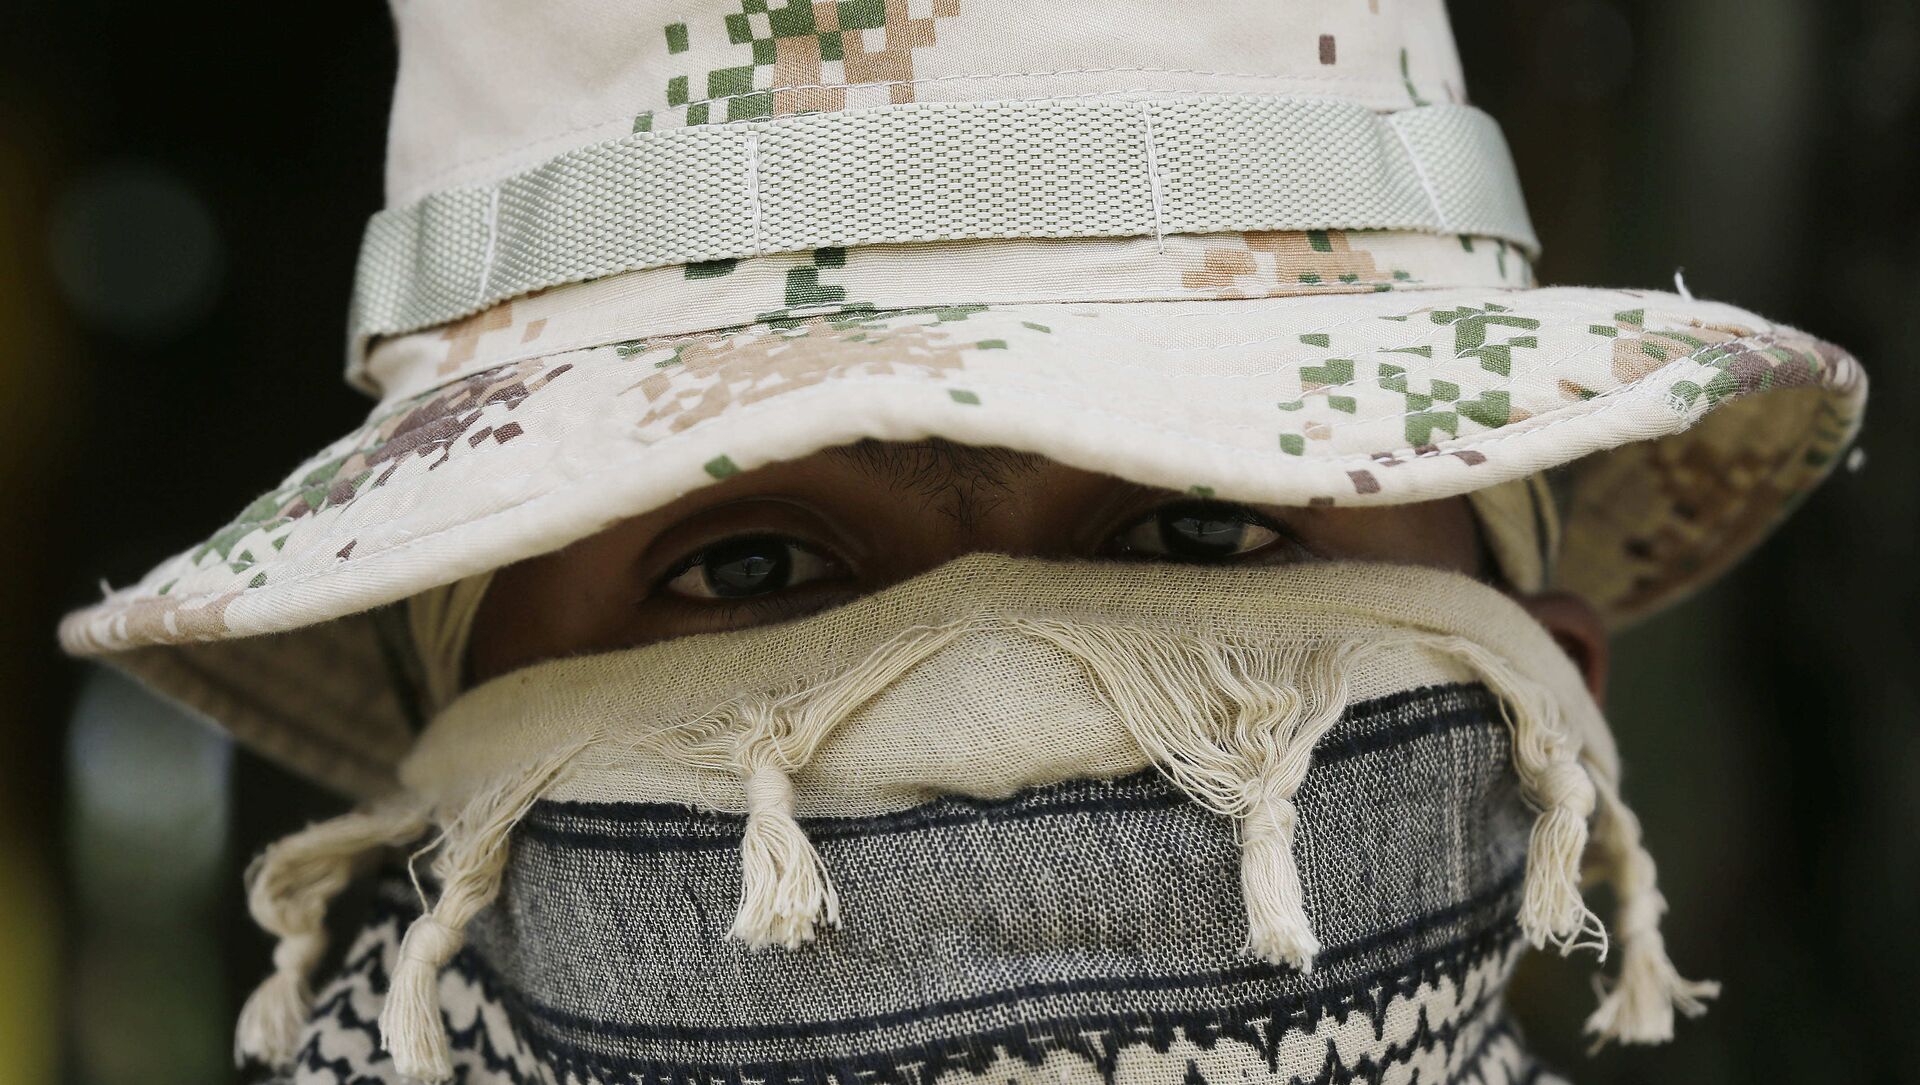 A Colombian Army Special Forces soldier waits to take part in a show of military exercises at the Tolemaida military base - Sputnik International, 1920, 28.07.2021